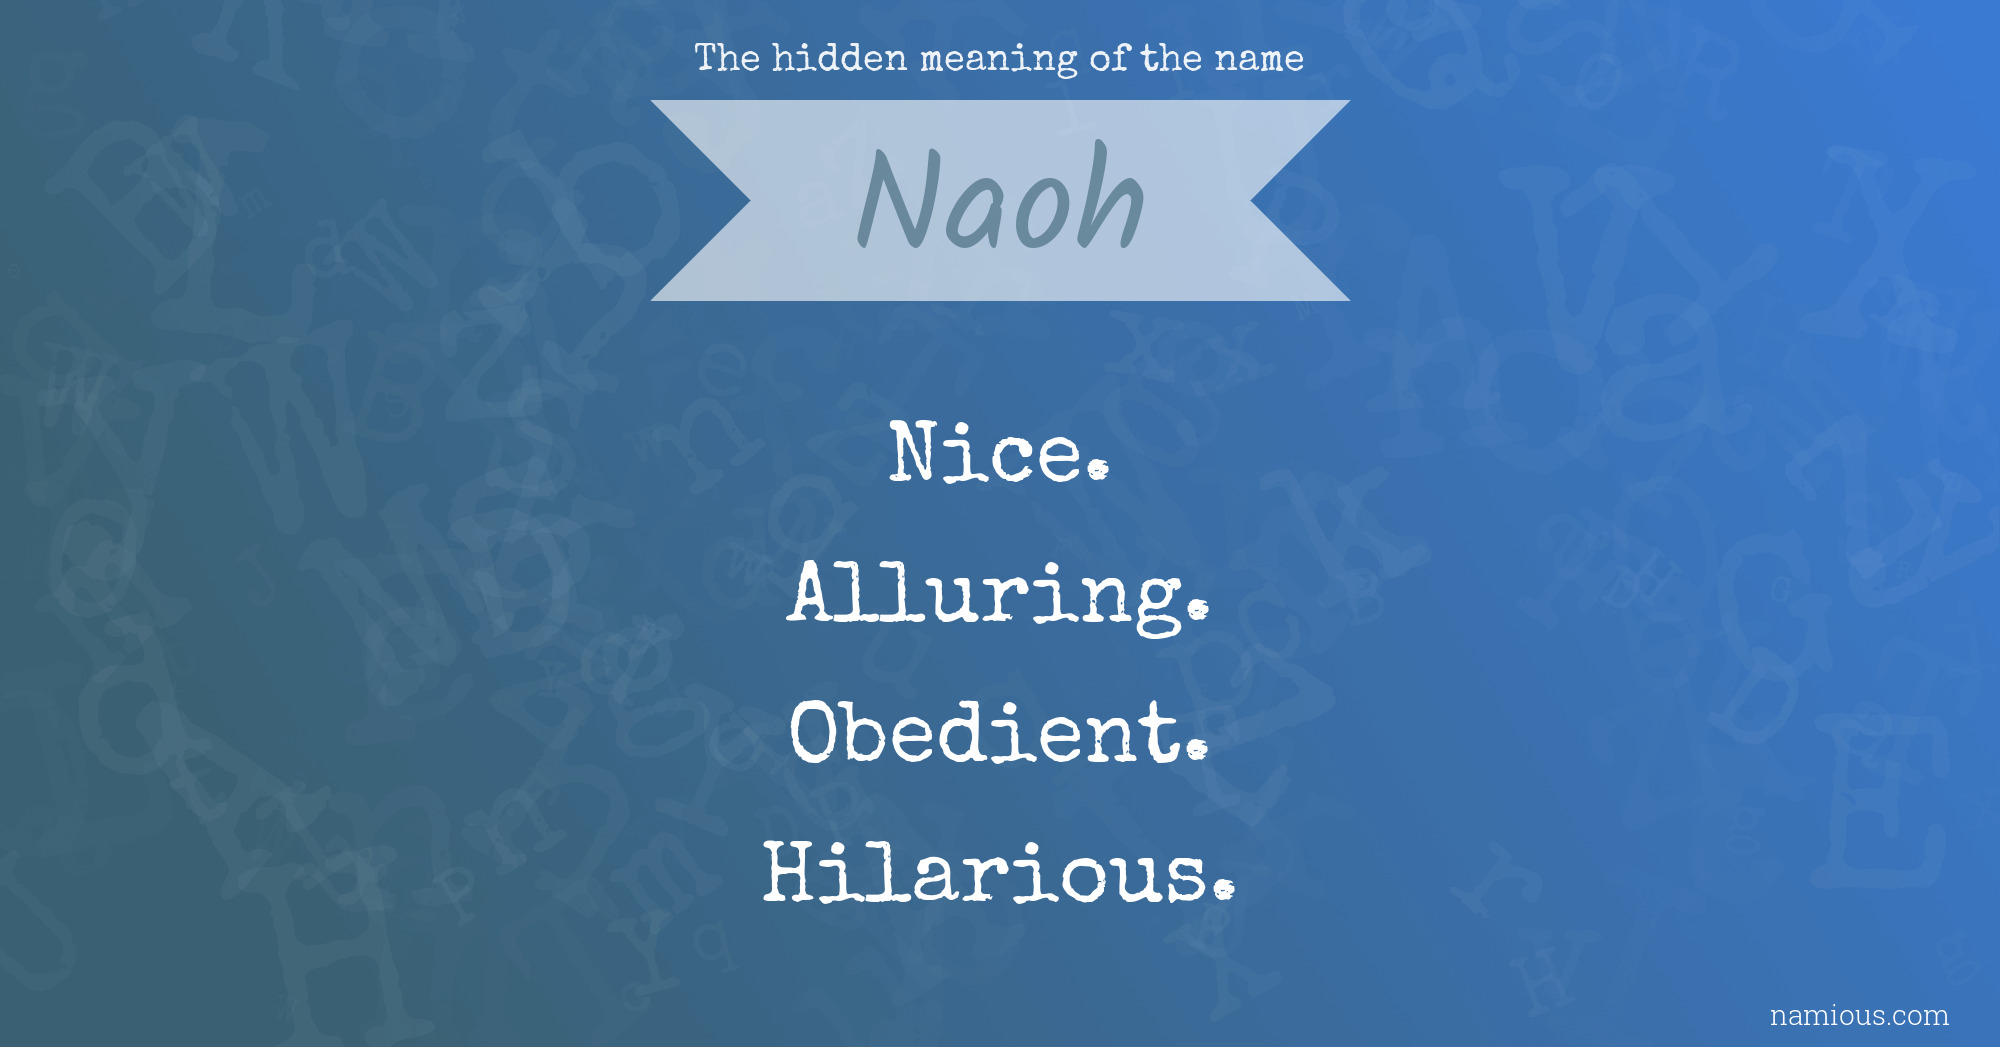 The hidden meaning of the name Naoh